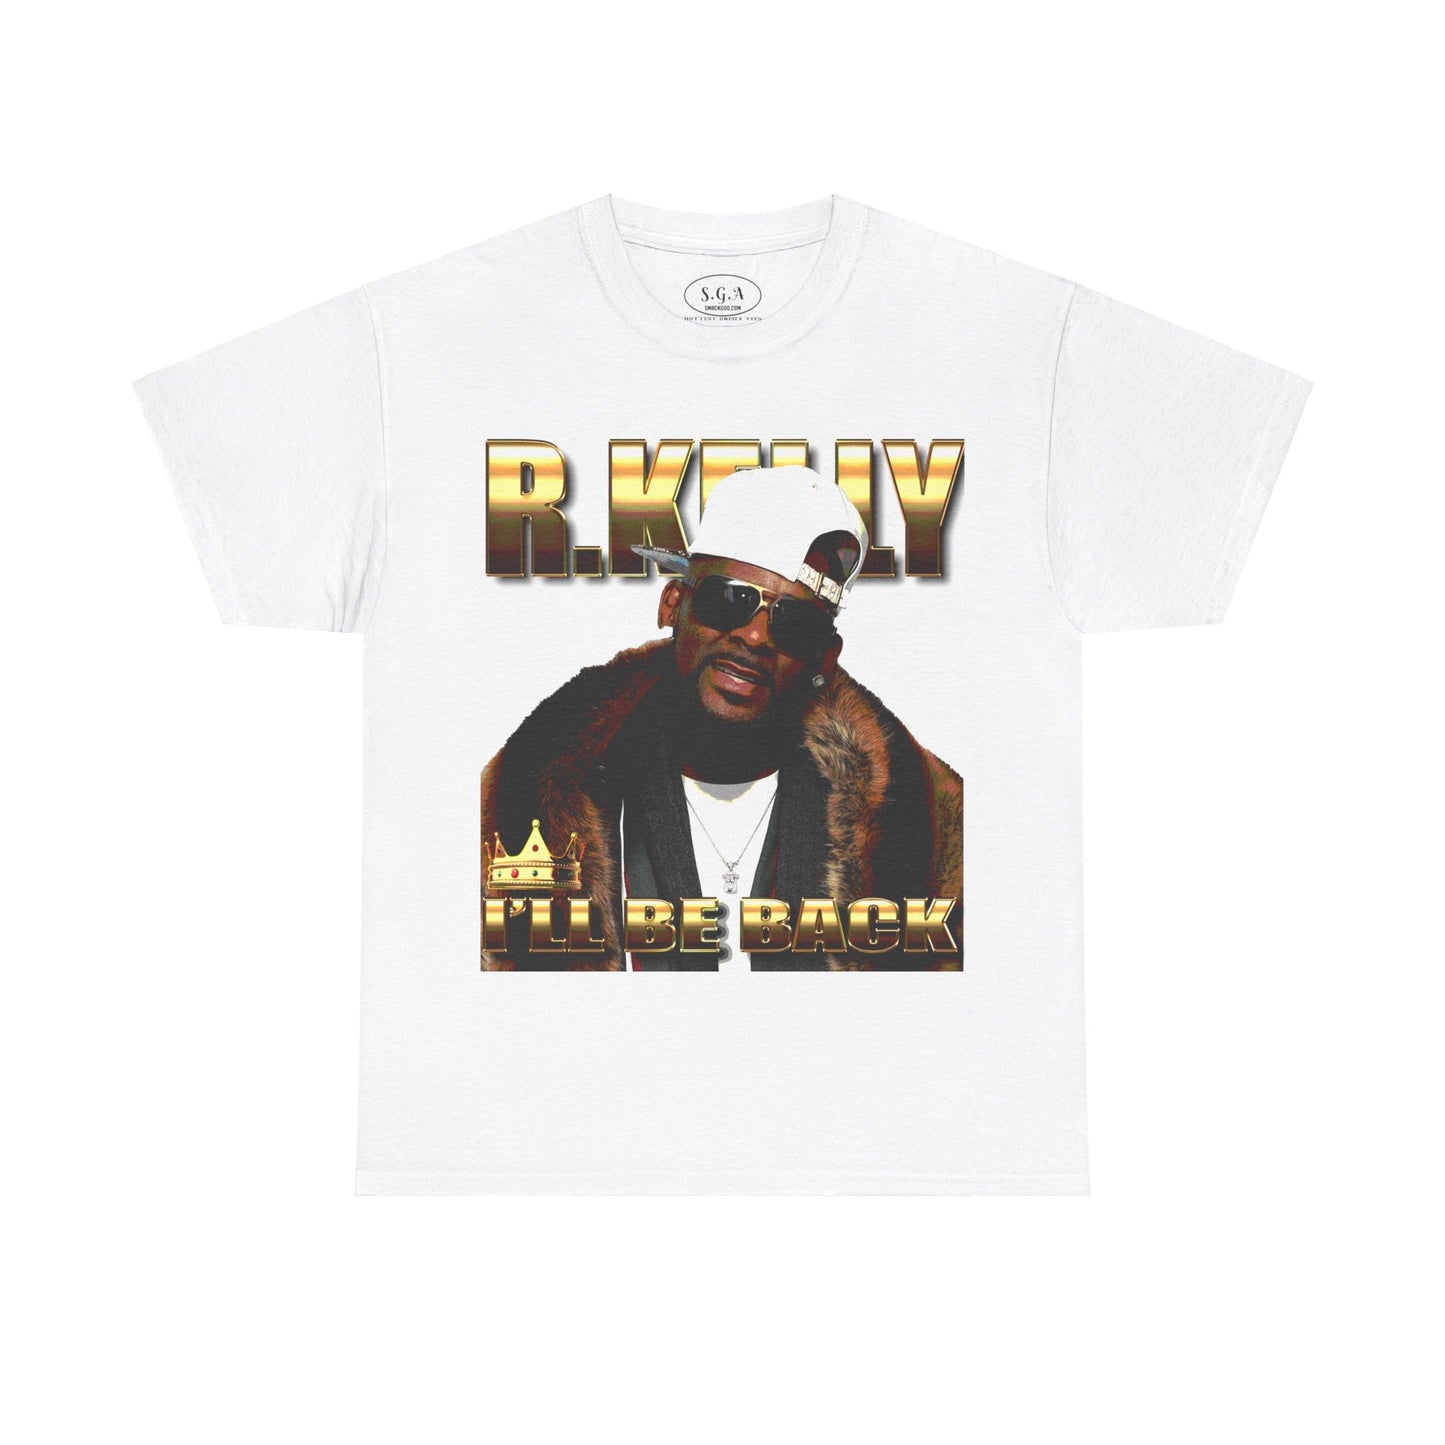 "Exclusive R. Kelly T-Shirt featuring a bold graphic design, available from Smack God Apparel."